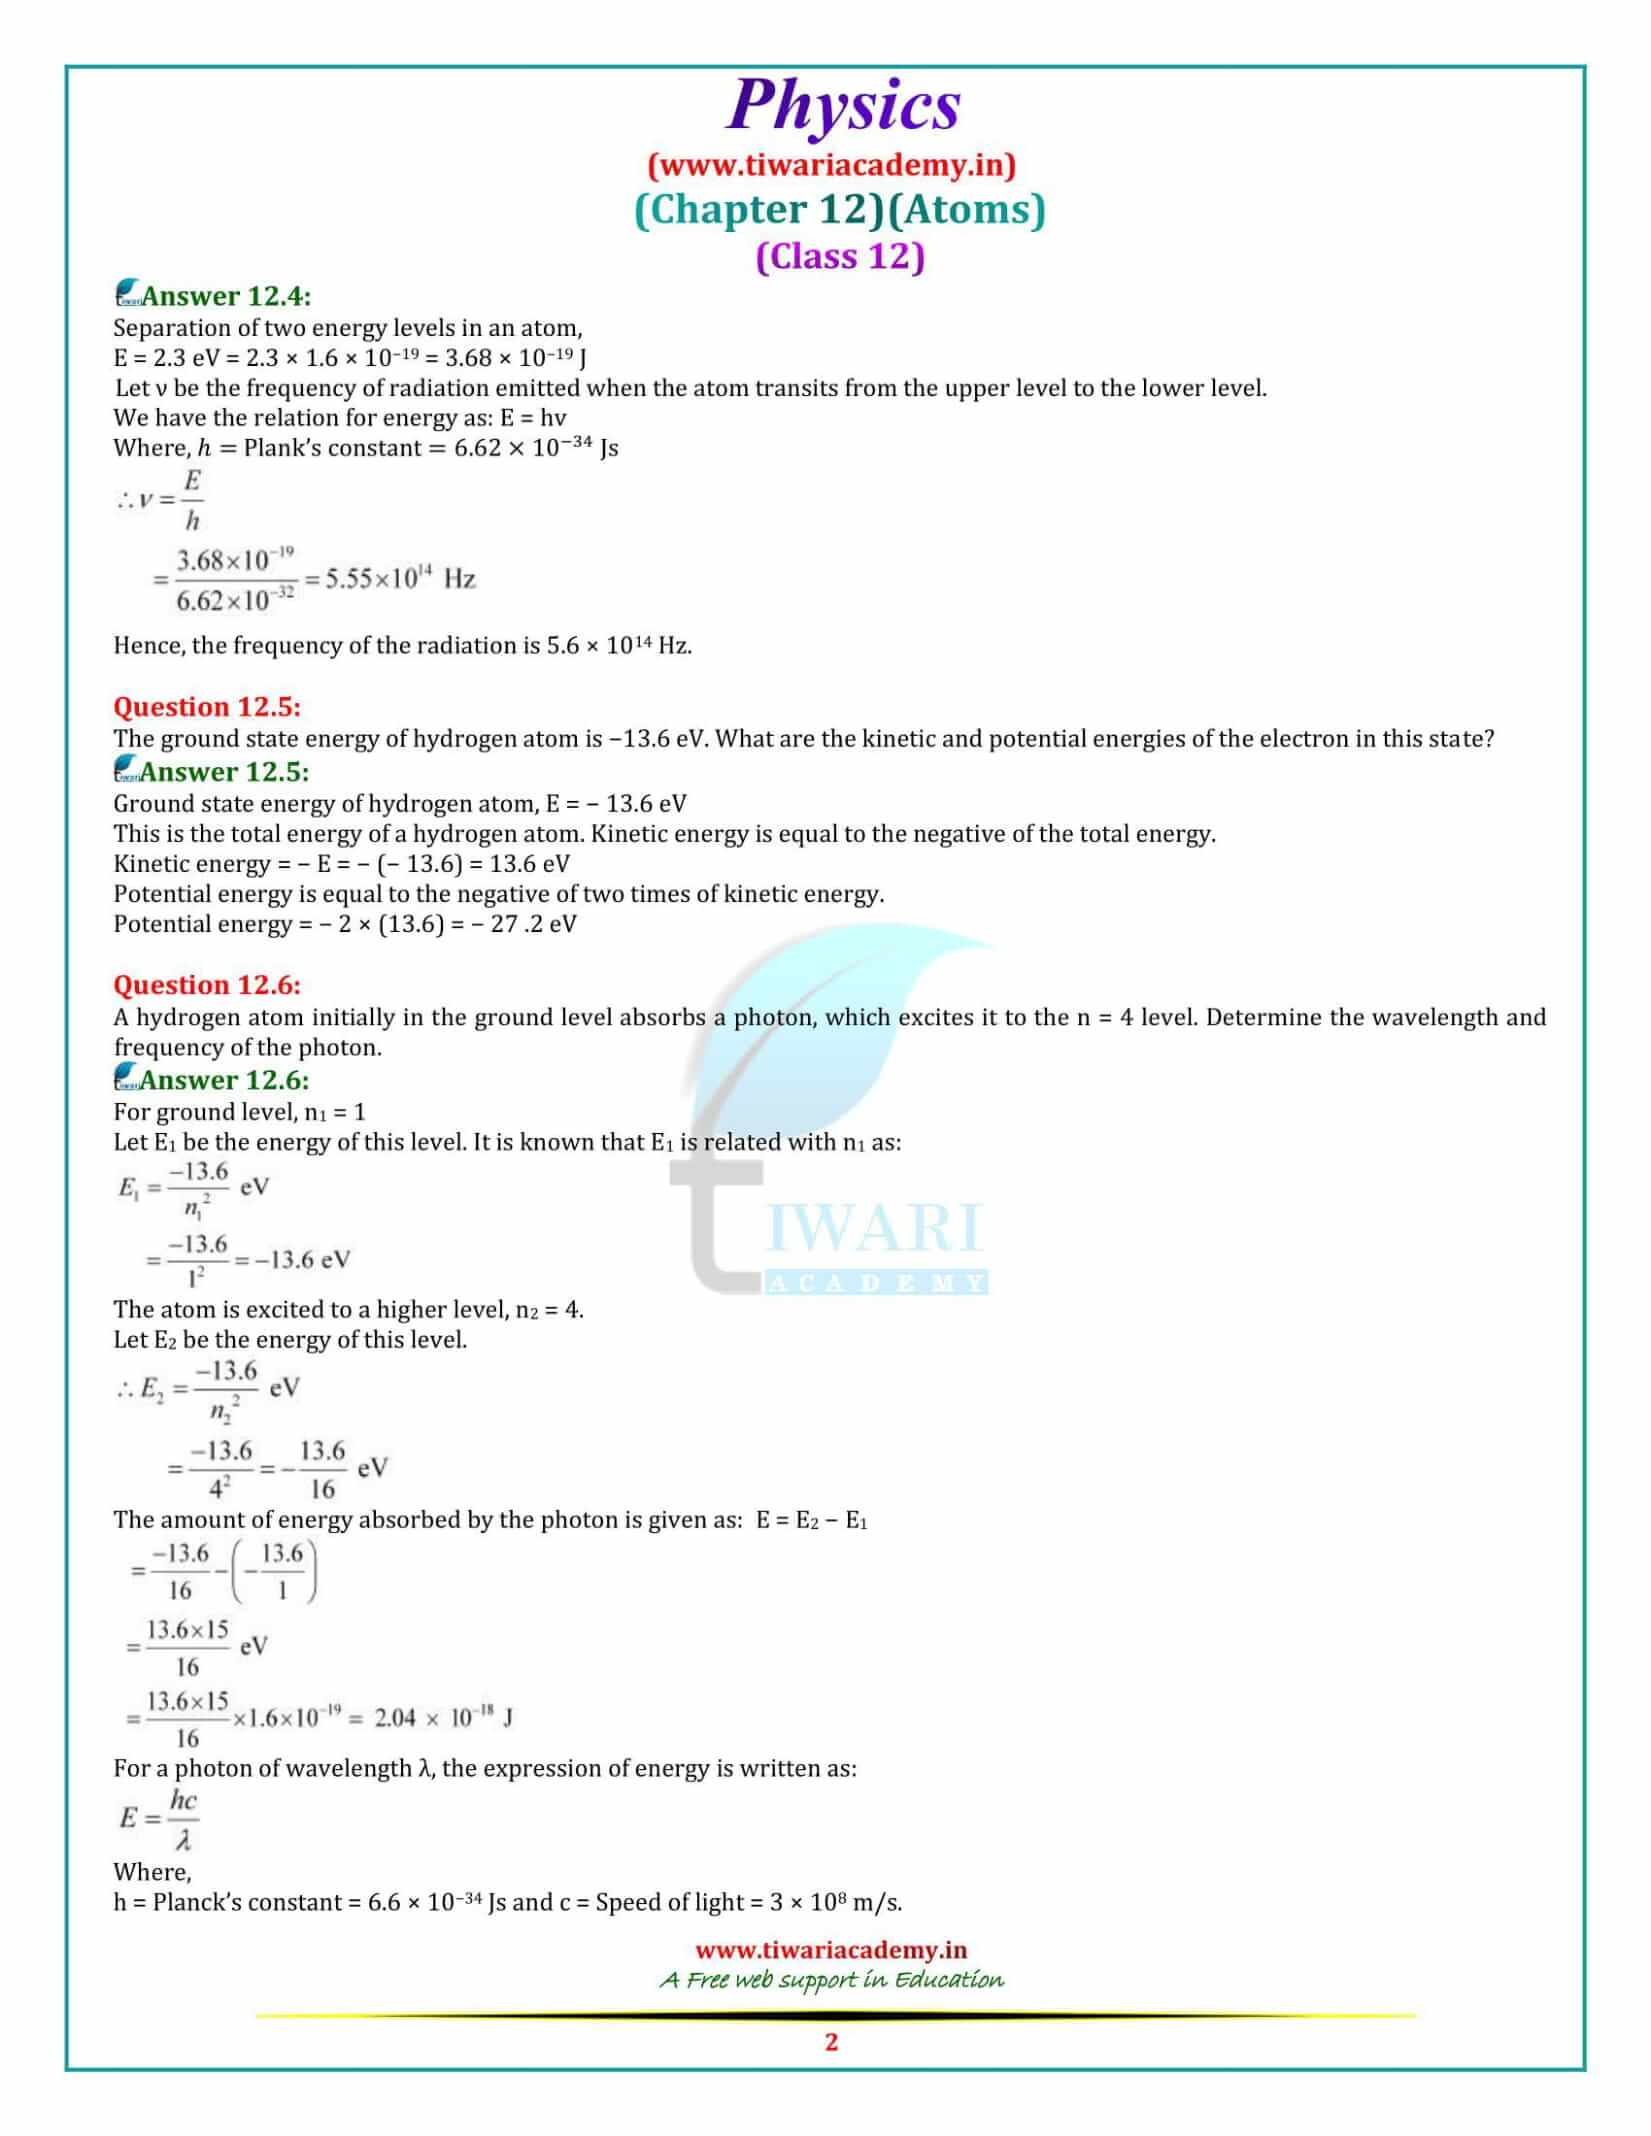 NCERT Solutions for Class 12 Physics Chapter 12 Atom in pdf form